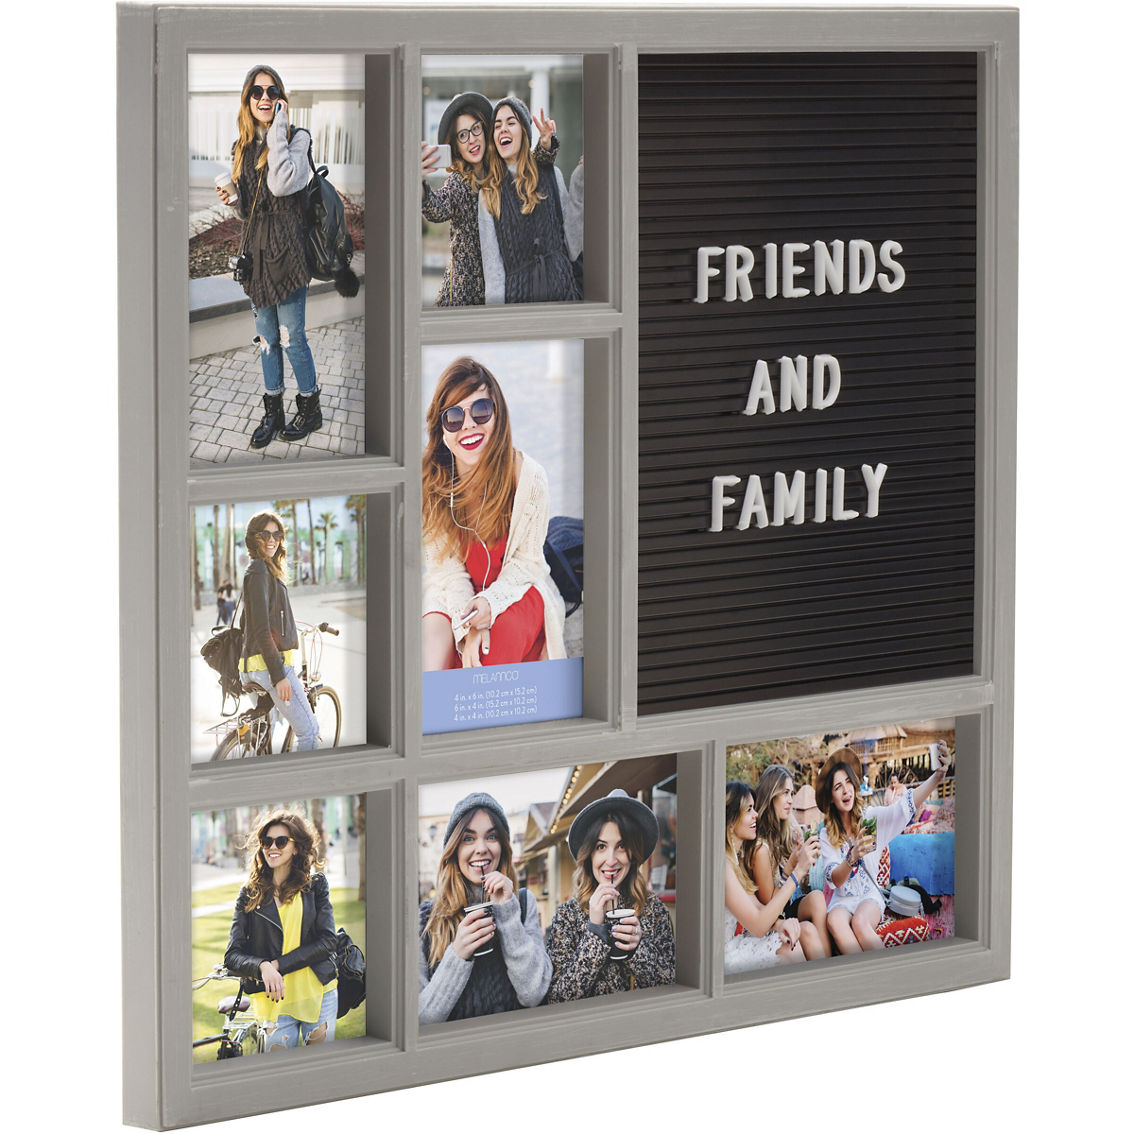 Melannco Customizable Letterboard 7-Opening Photo Collage Frame - Image 3 of 5